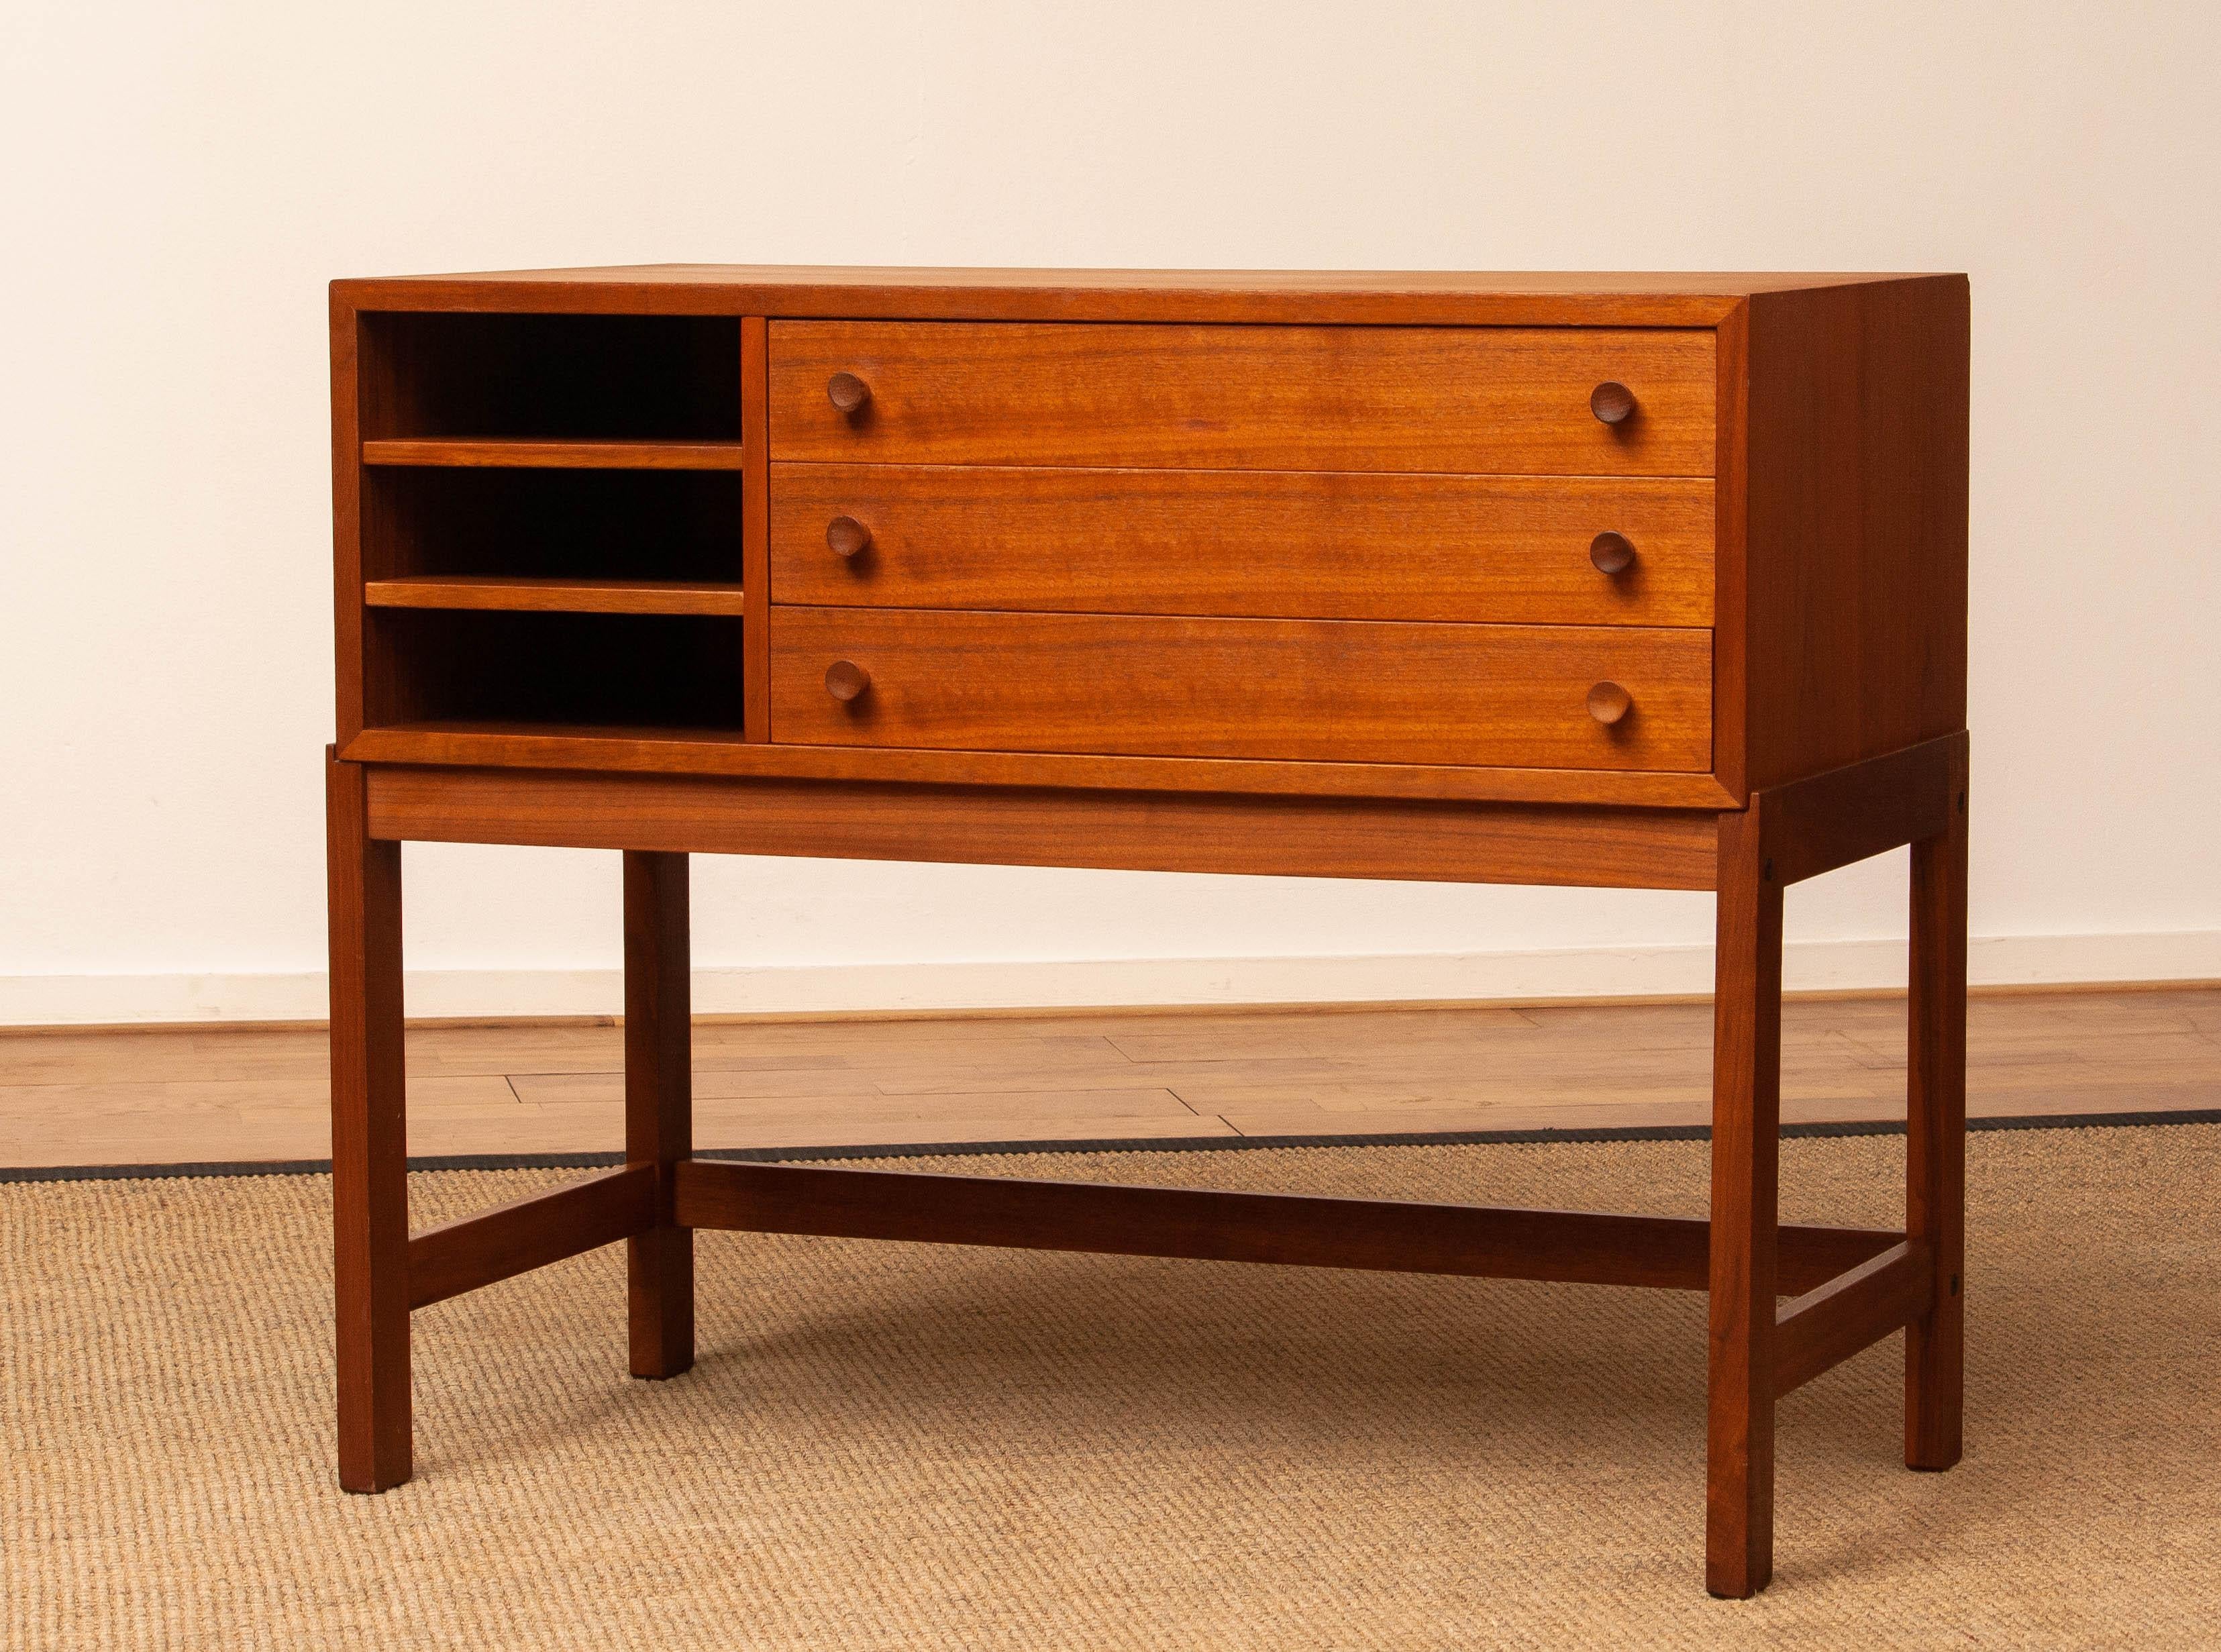 Danish 1960's Teak 'Free Standing' Small Sideboard / Small Credensaz from Denmark For Sale